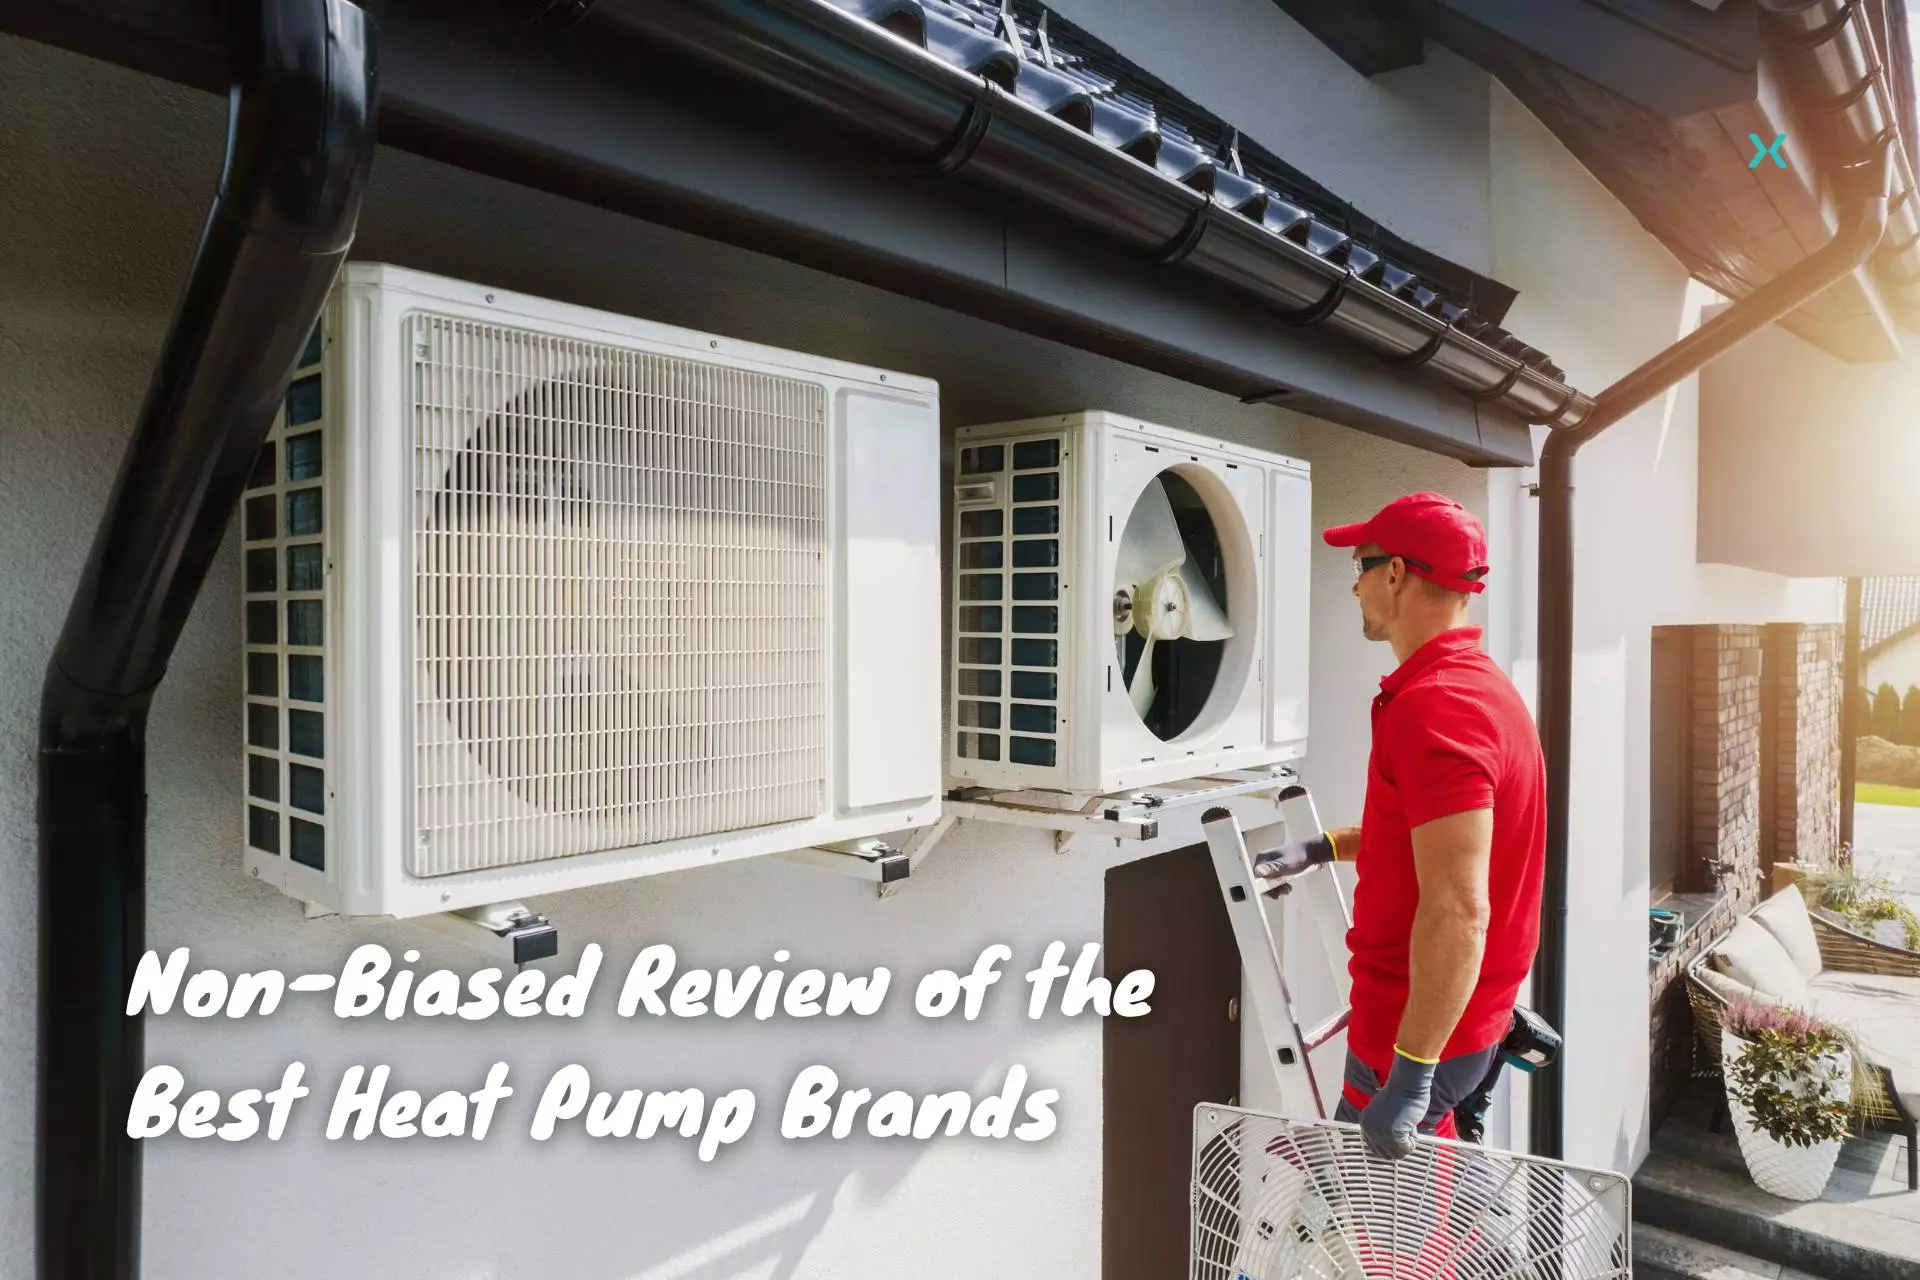 Non-Biased Review of the Best Heat Pump Brands